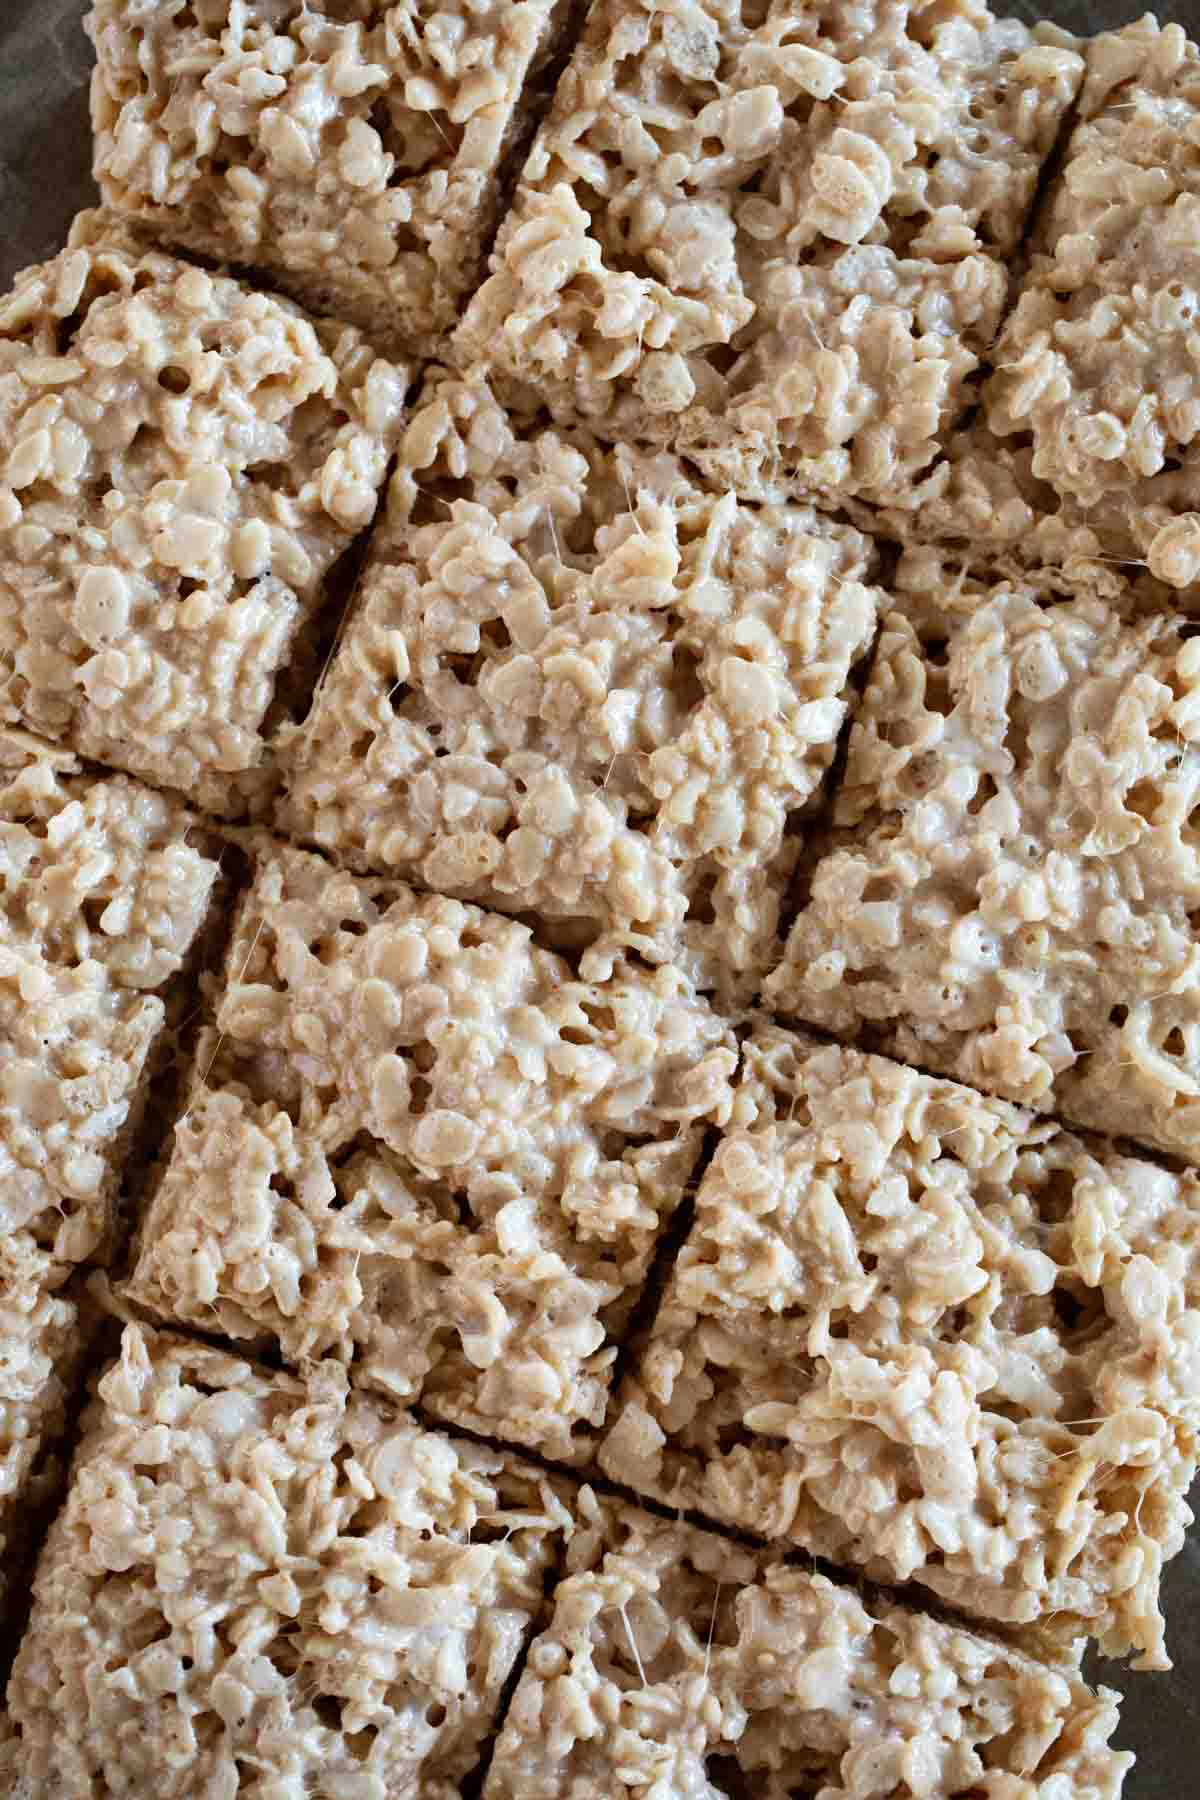 Top view of caramel rice krispie treats cut into squares